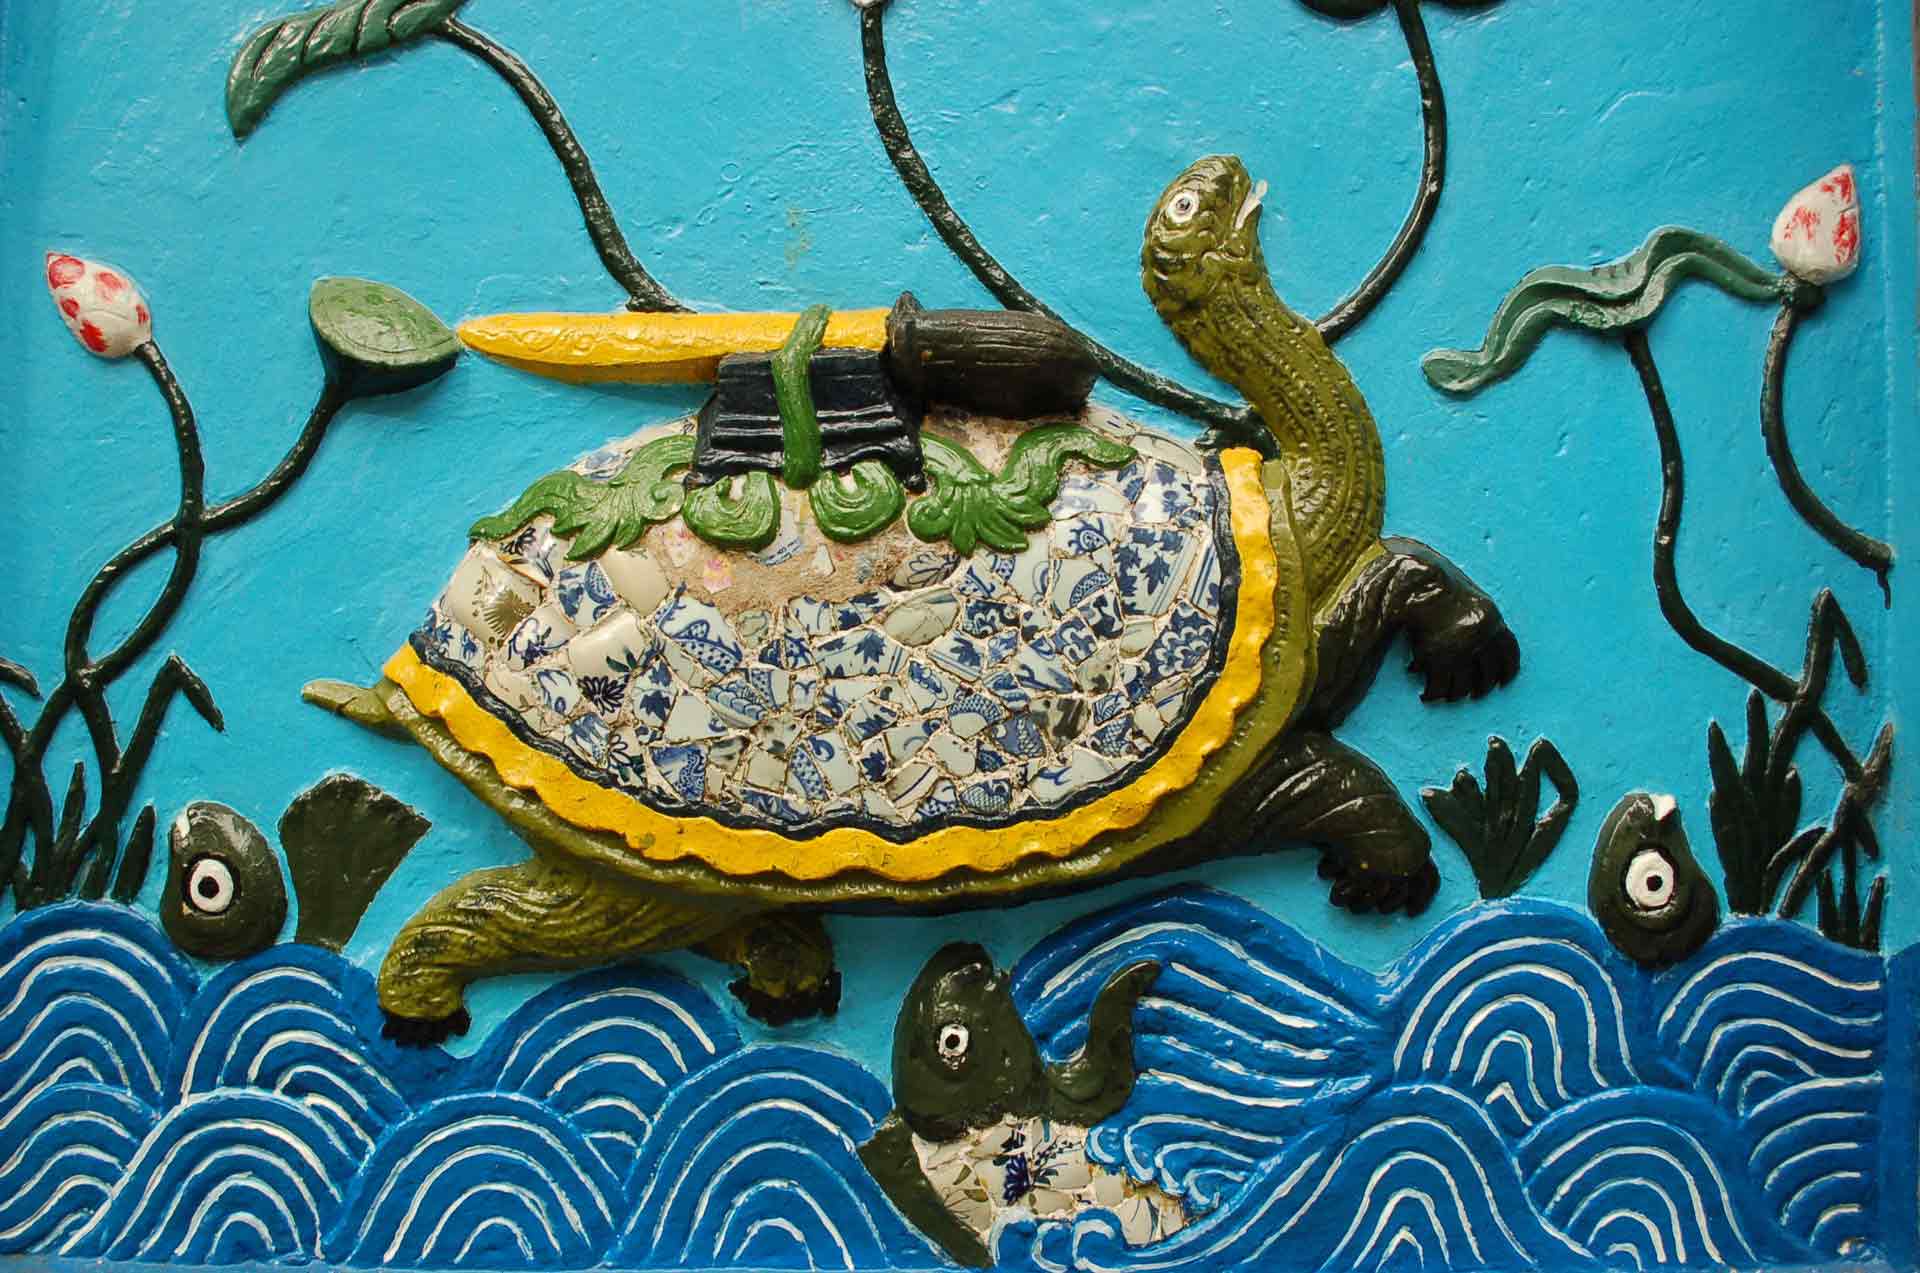 Depiction of the turtle Kim Qui with the Restored Sword, in the temple of Hoàn Kiếm. | Image via Wikipedia.